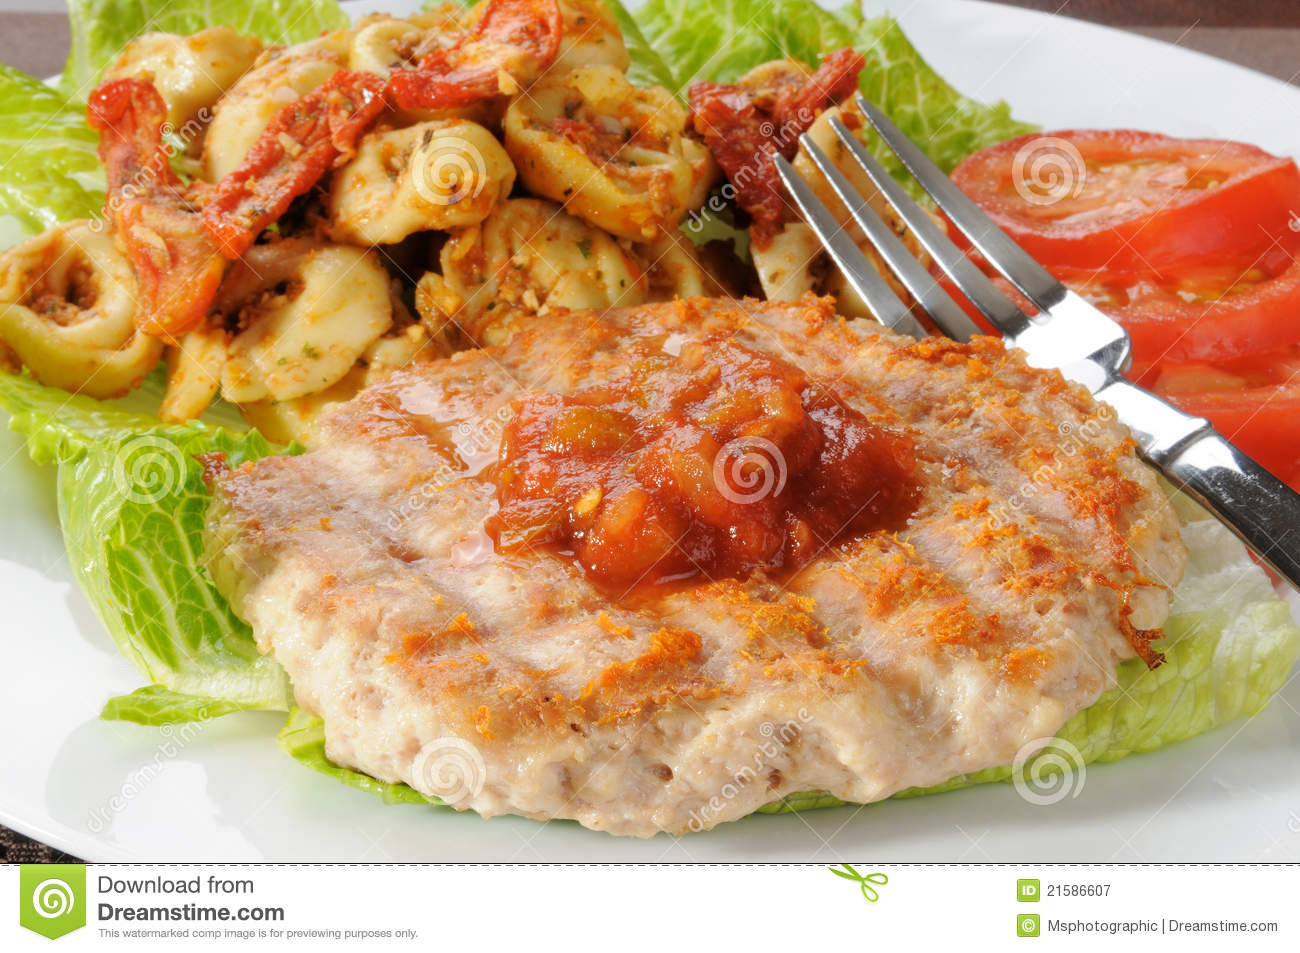 Grilled Ground Chicken Patty Royalty Free Stock Photography   Image